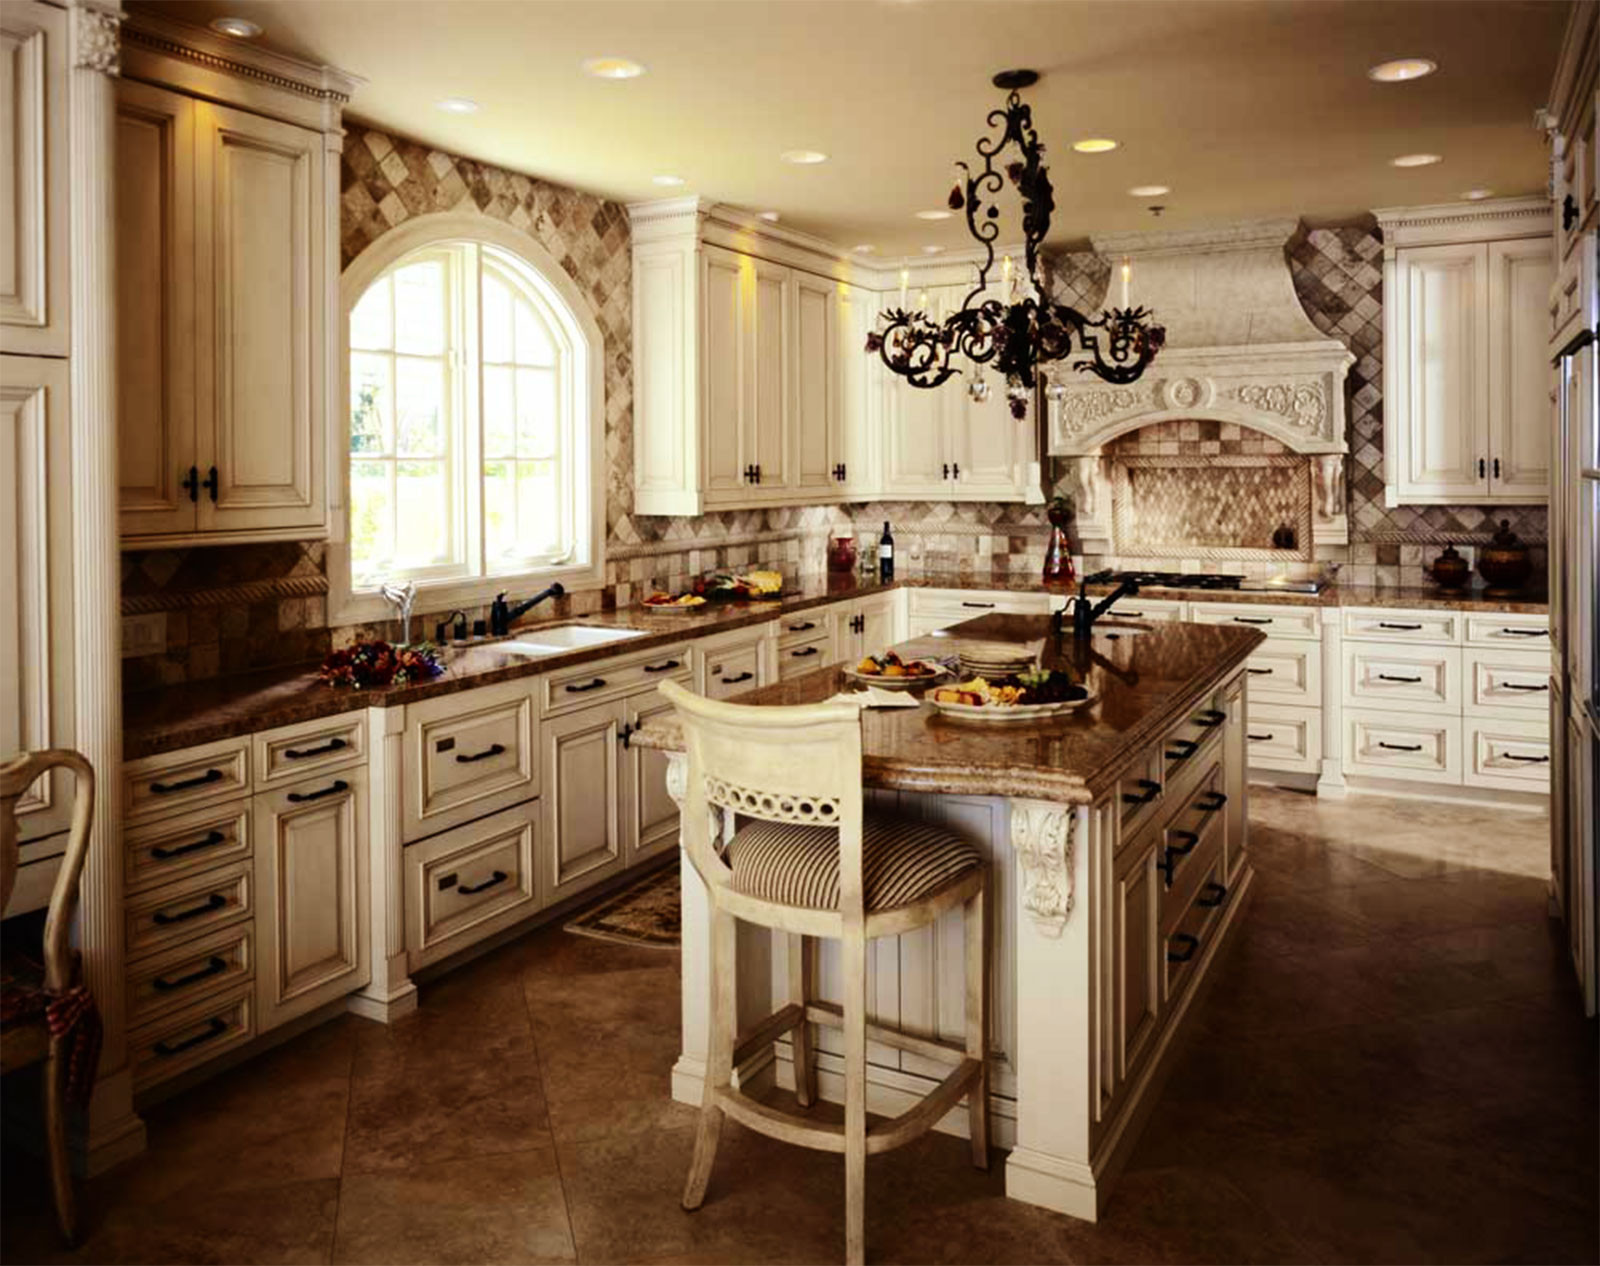 Rustic Painted Kitchen Cabinets
 rustic kitchen cabinets Furniture Ideas